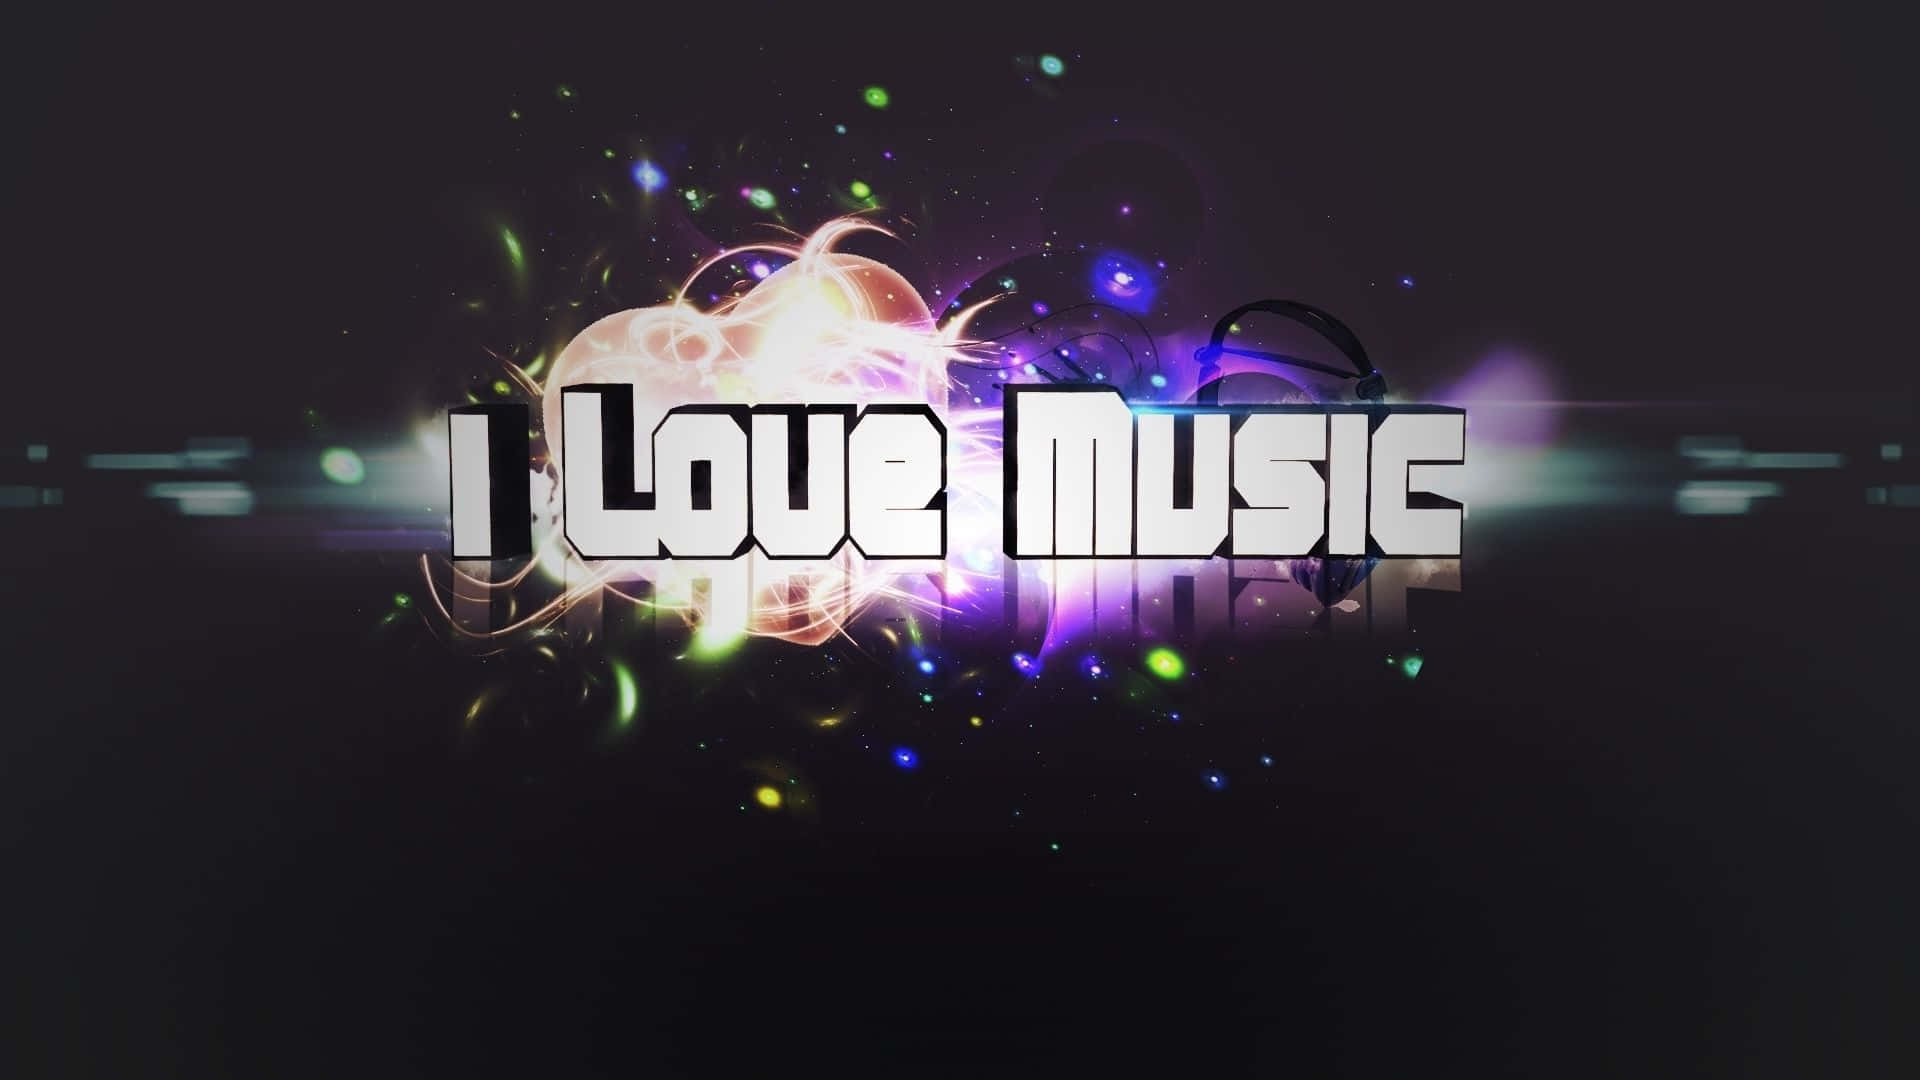 Feel the love and happiness of music